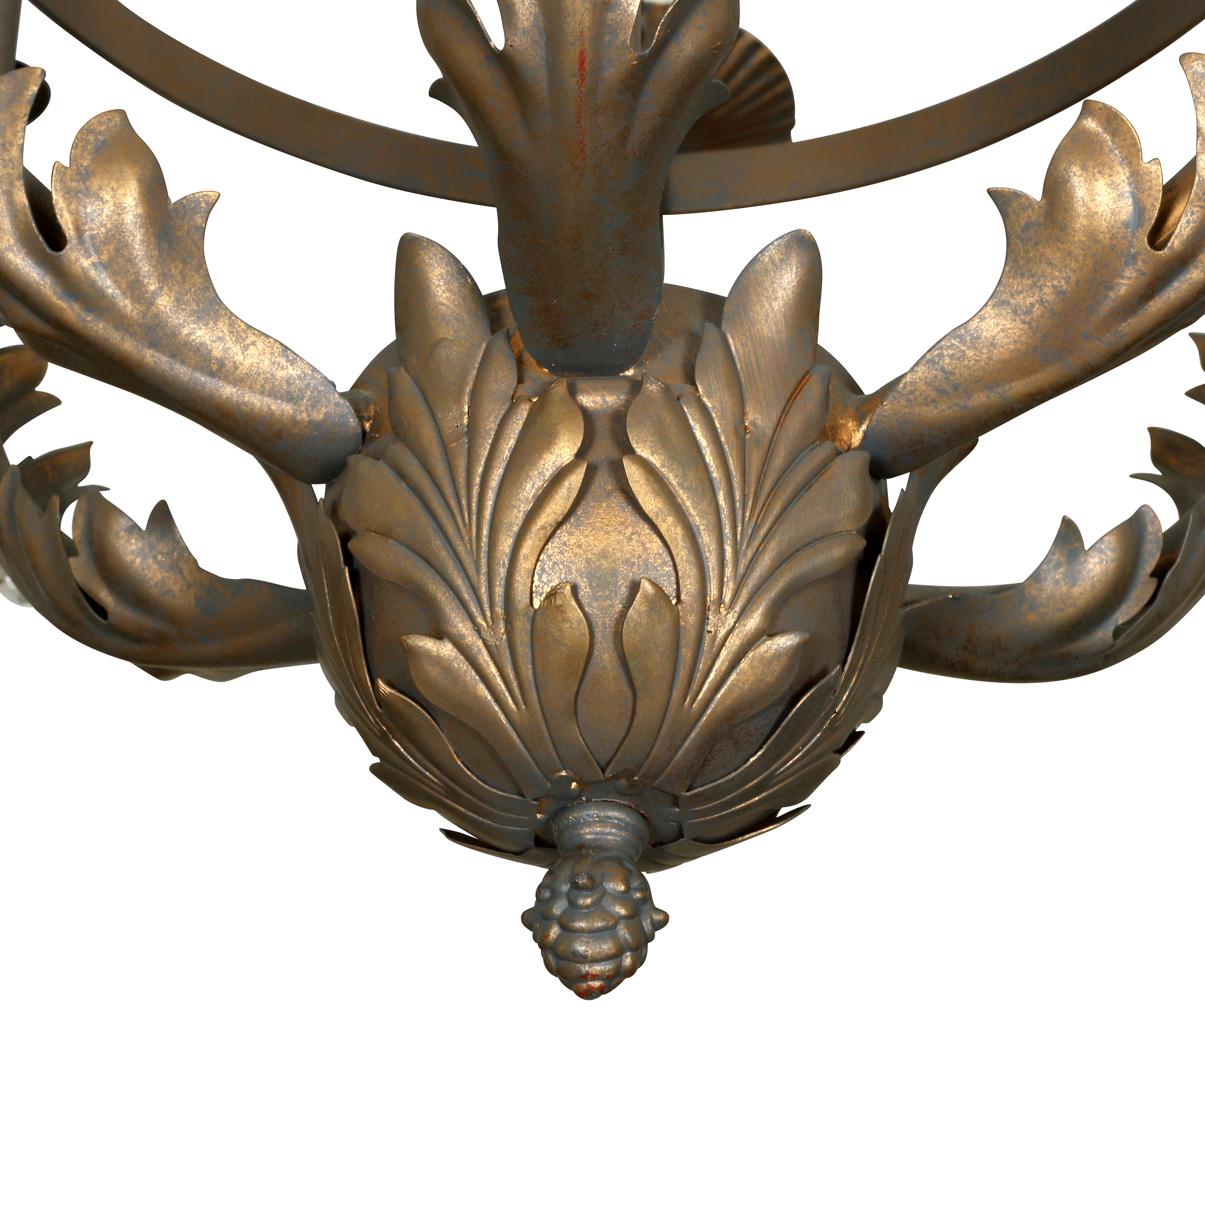 Neoclassical style, six-light chandelier with scroll arms and leaf design.